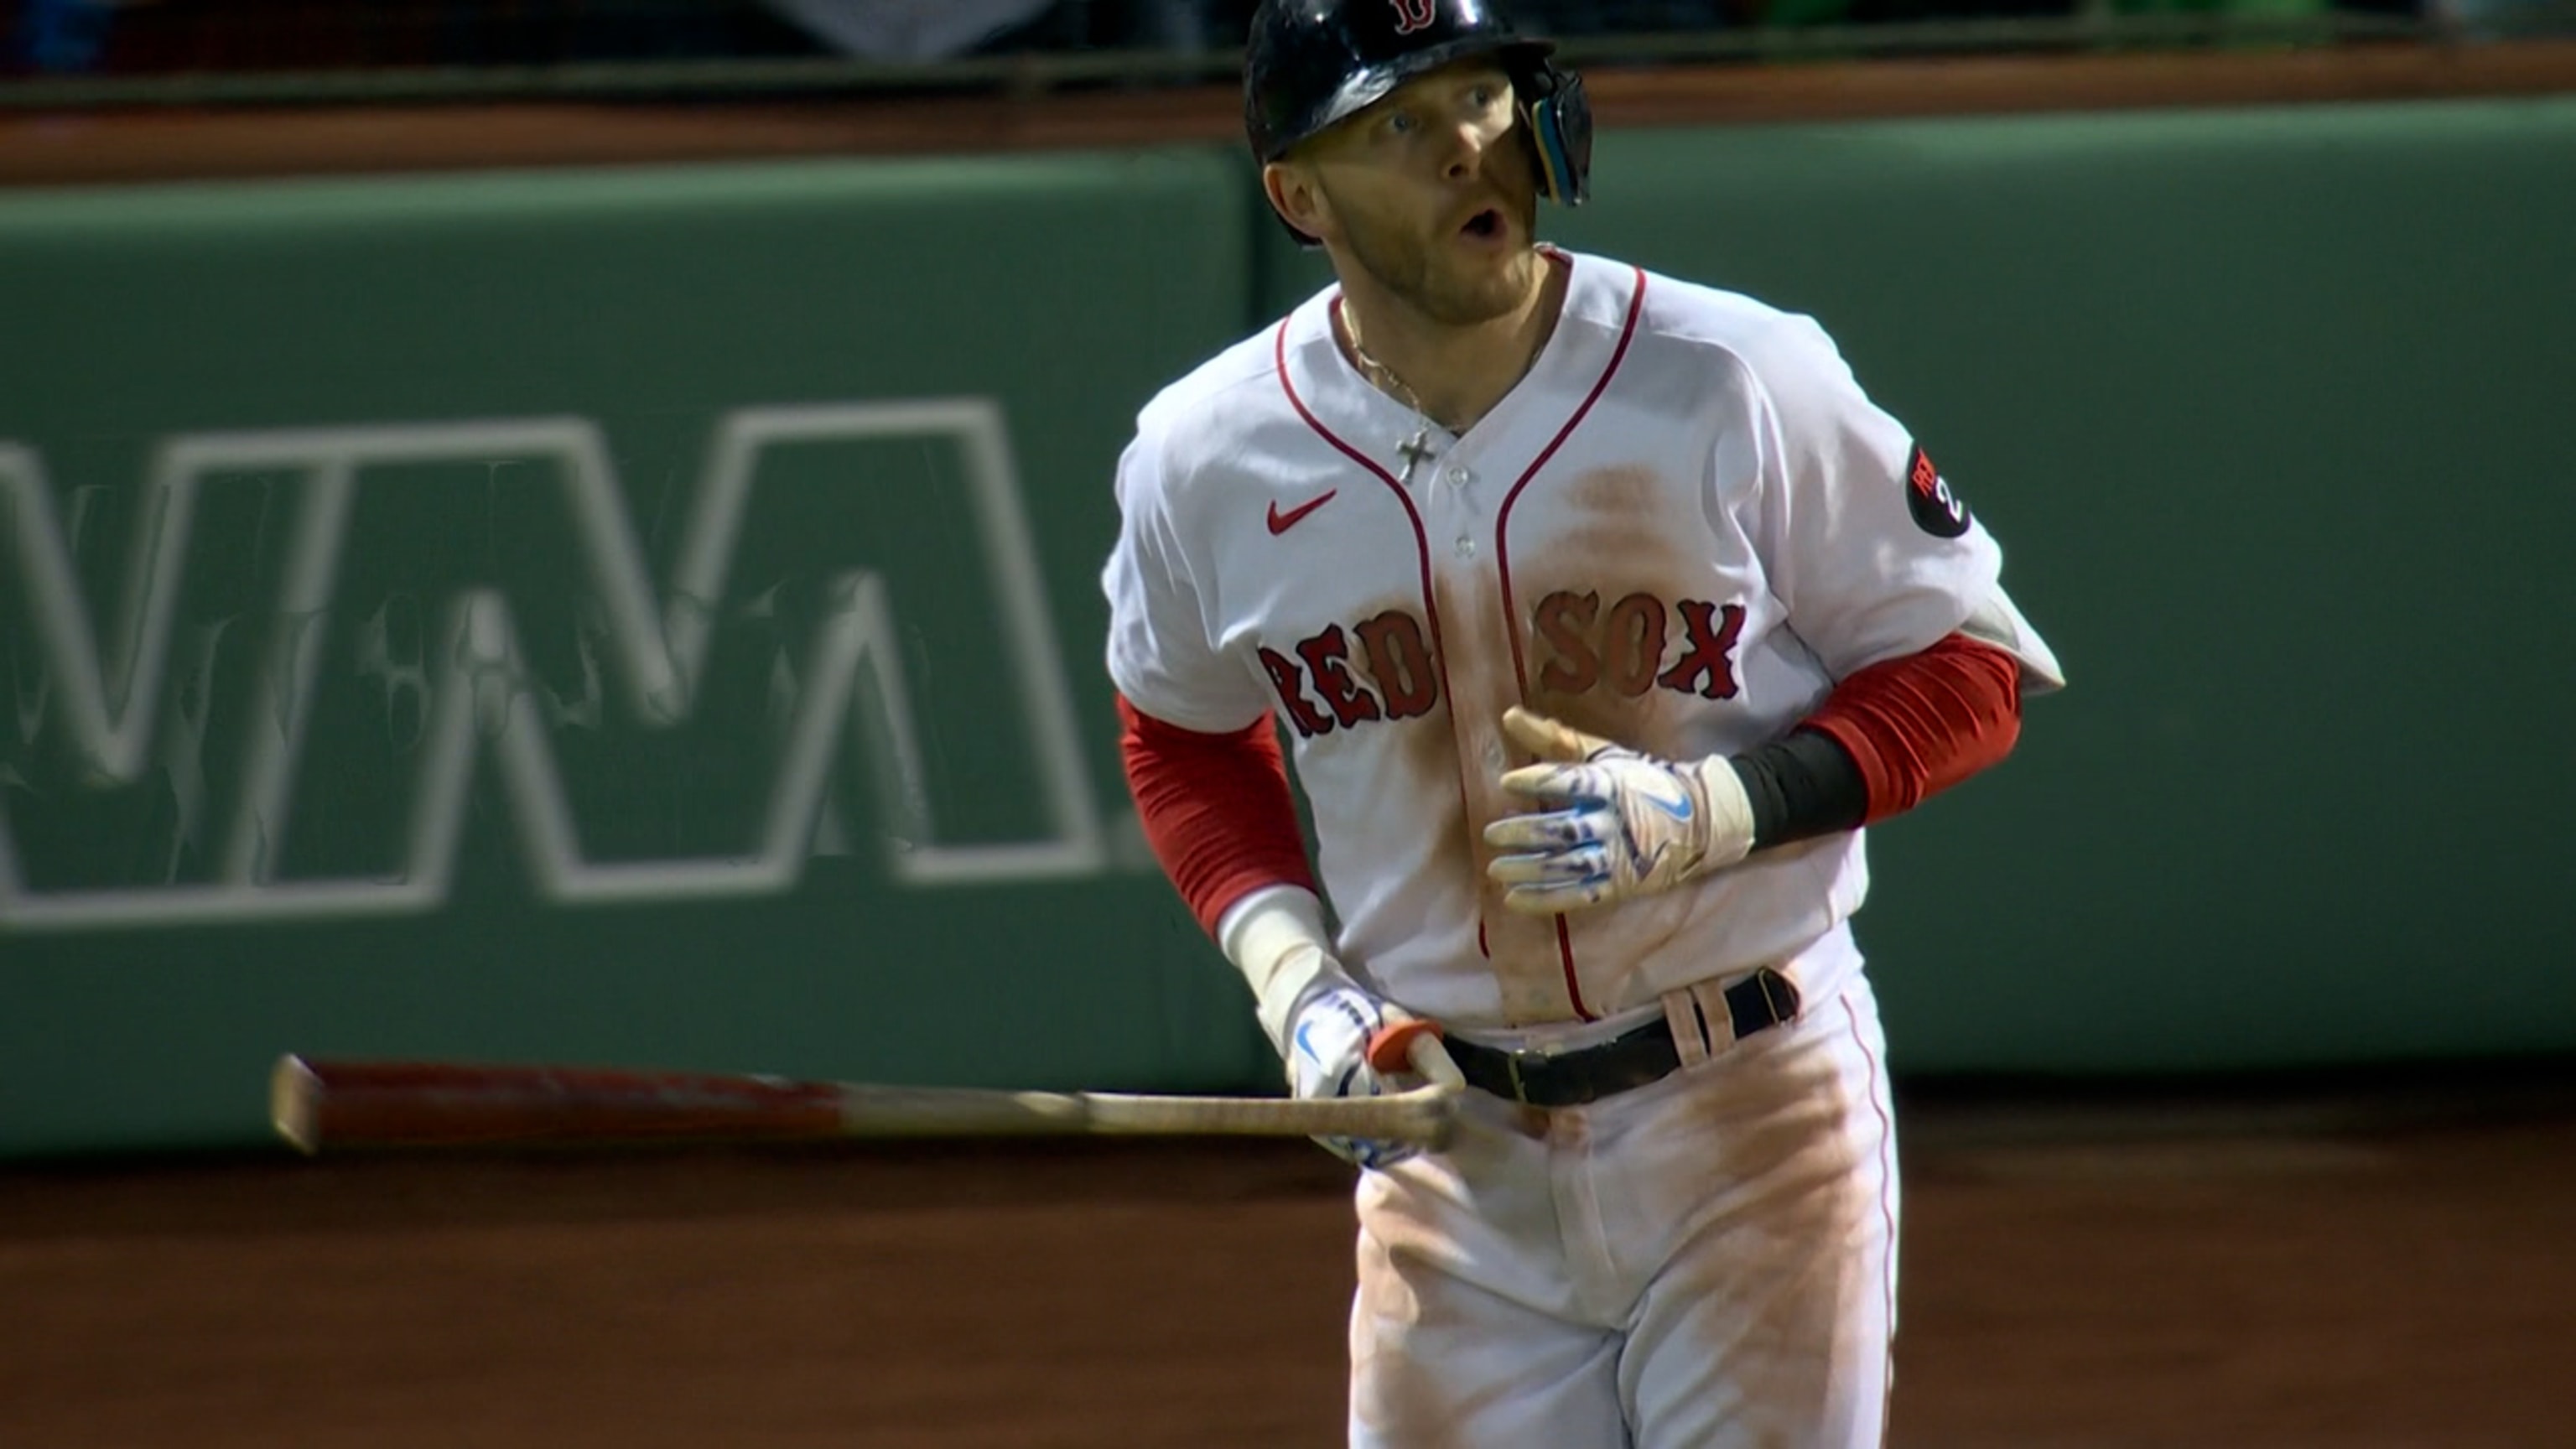 Trevor Story's 3-run HR out of Fenway helps Red Sox beat Tigers